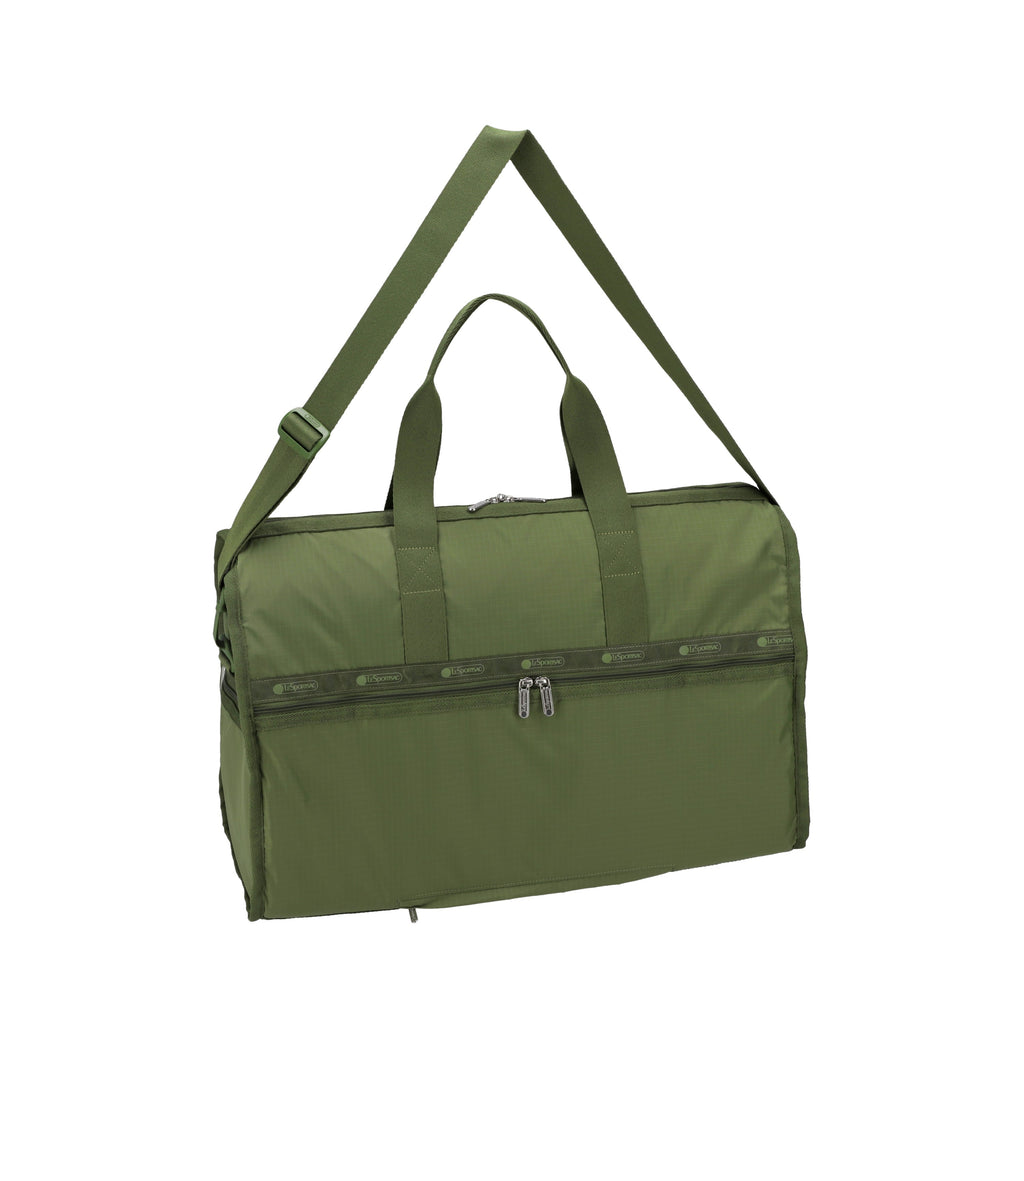 Deluxe Large Weekender - Olive solid – LeSportsac